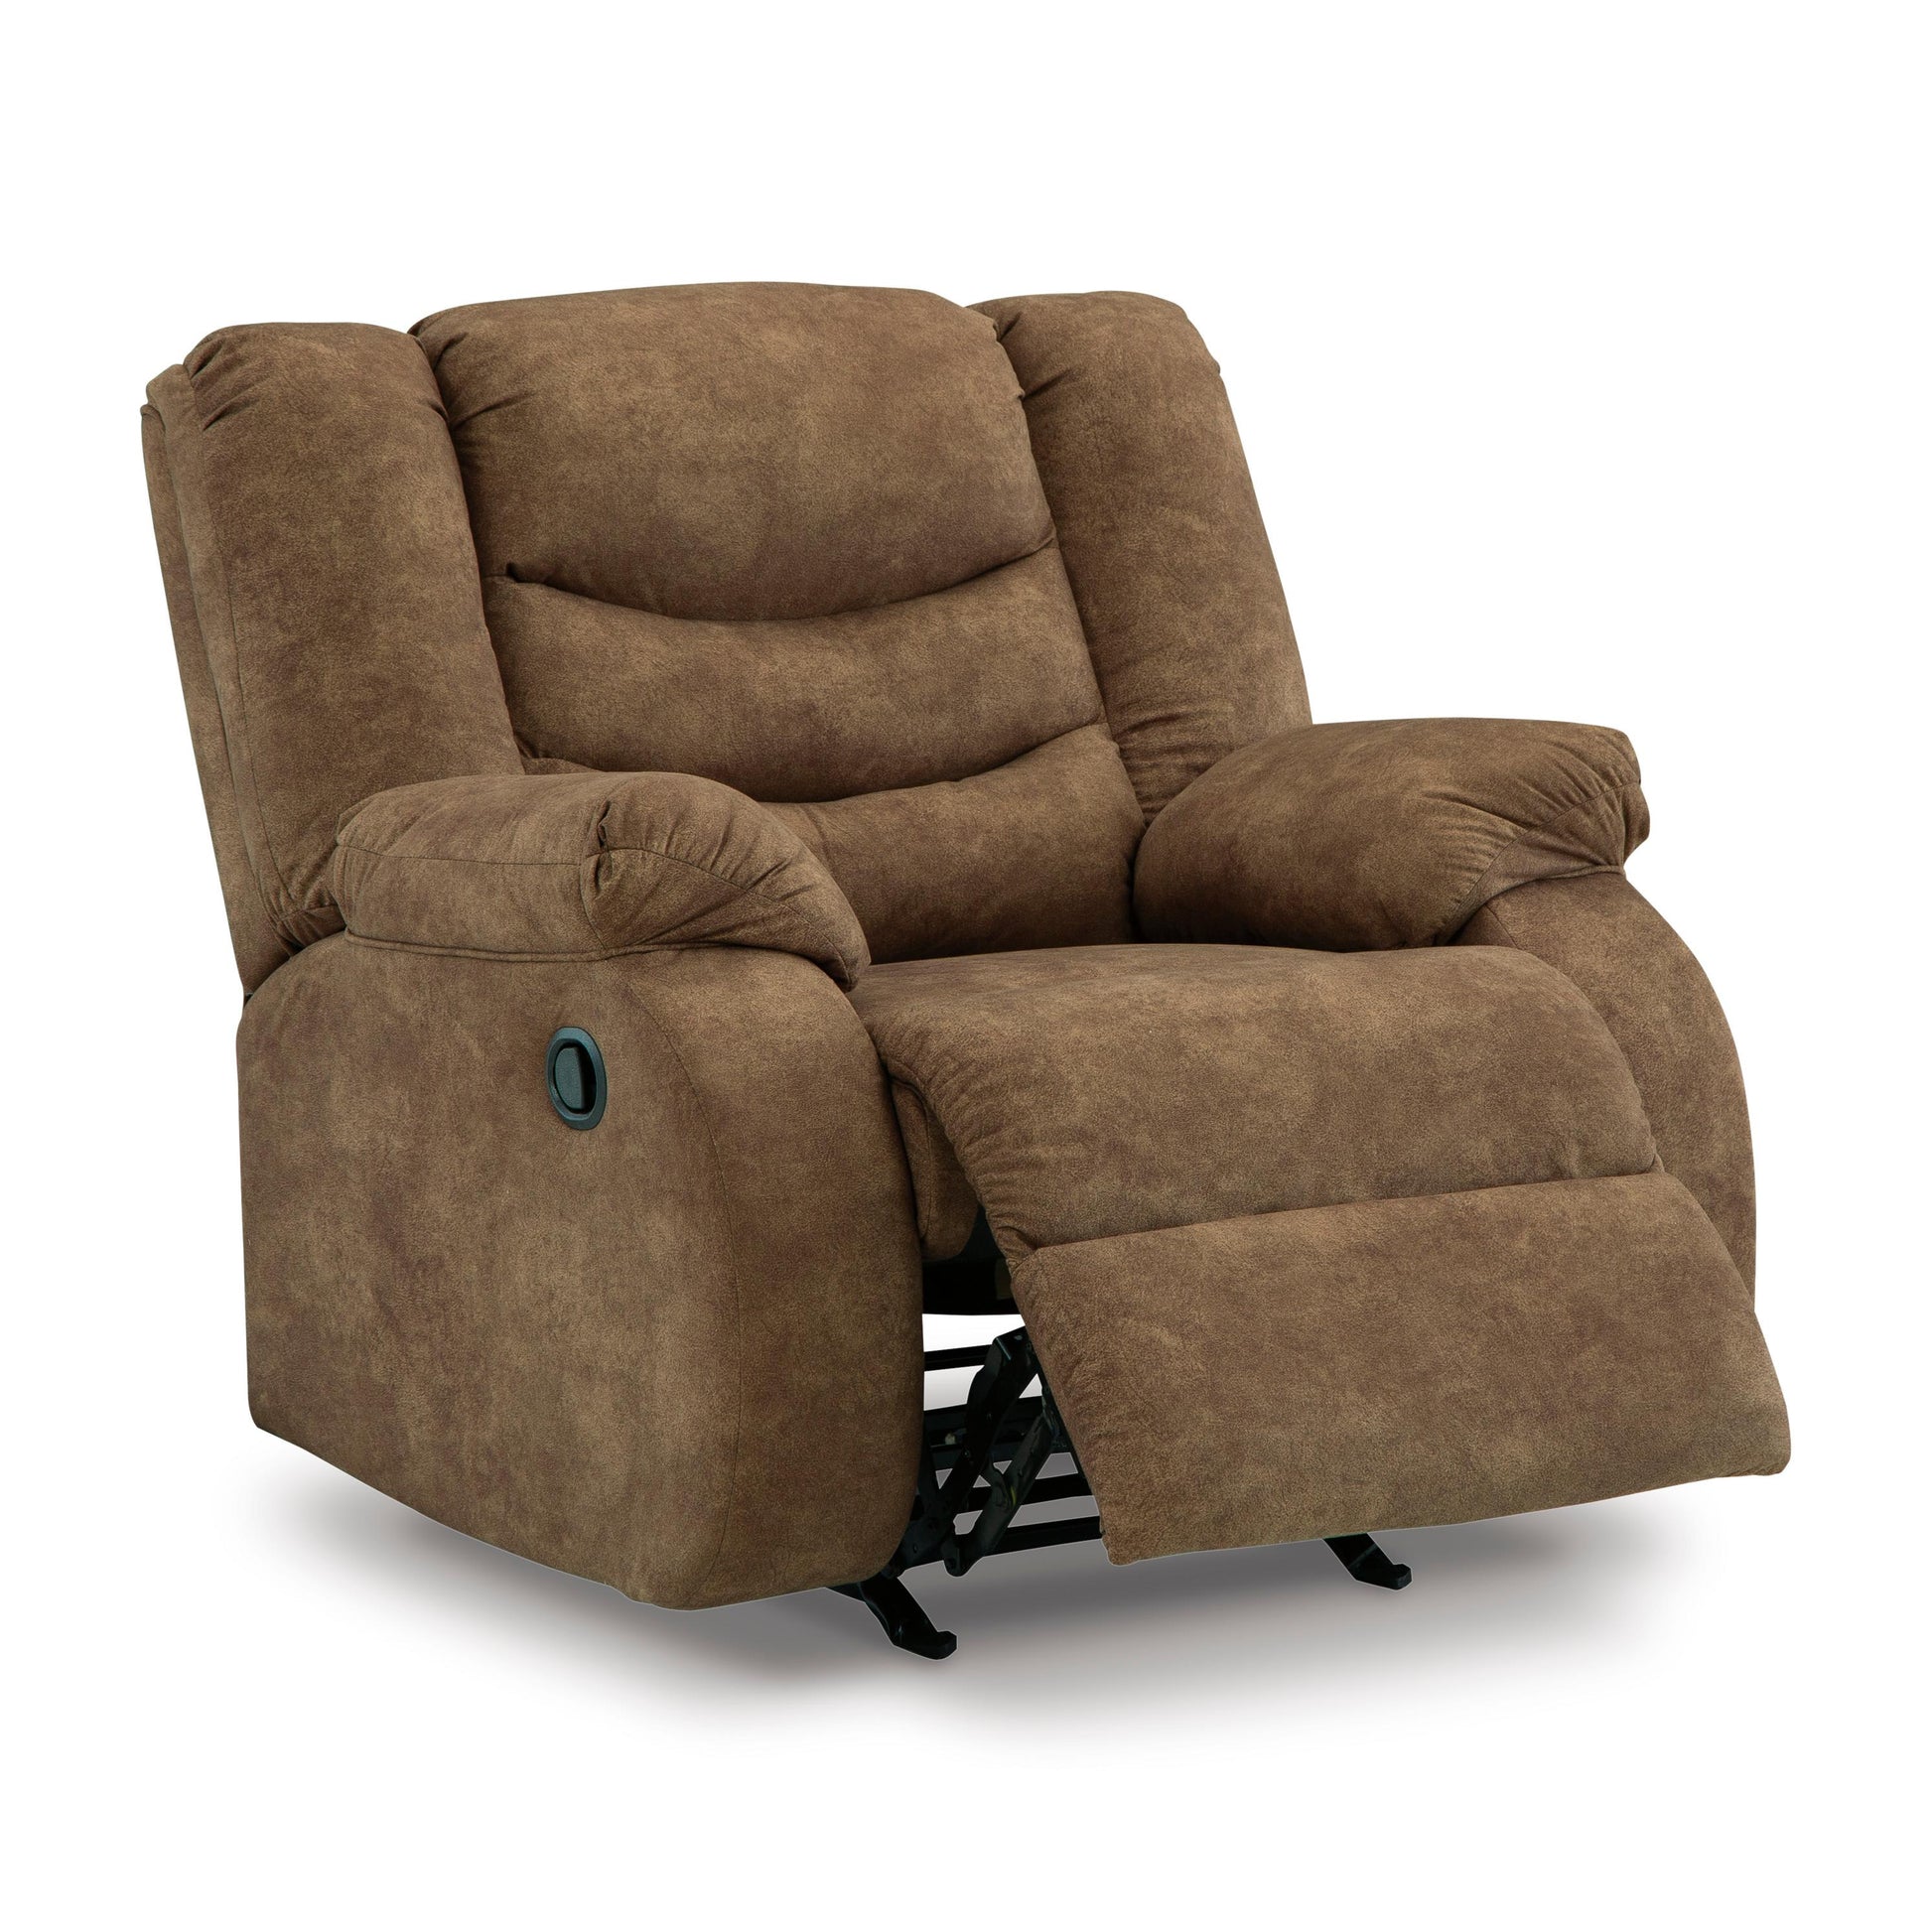 Signature Design by Ashley Partymate Rocker Leather Look Recliner 3690225 IMAGE 2